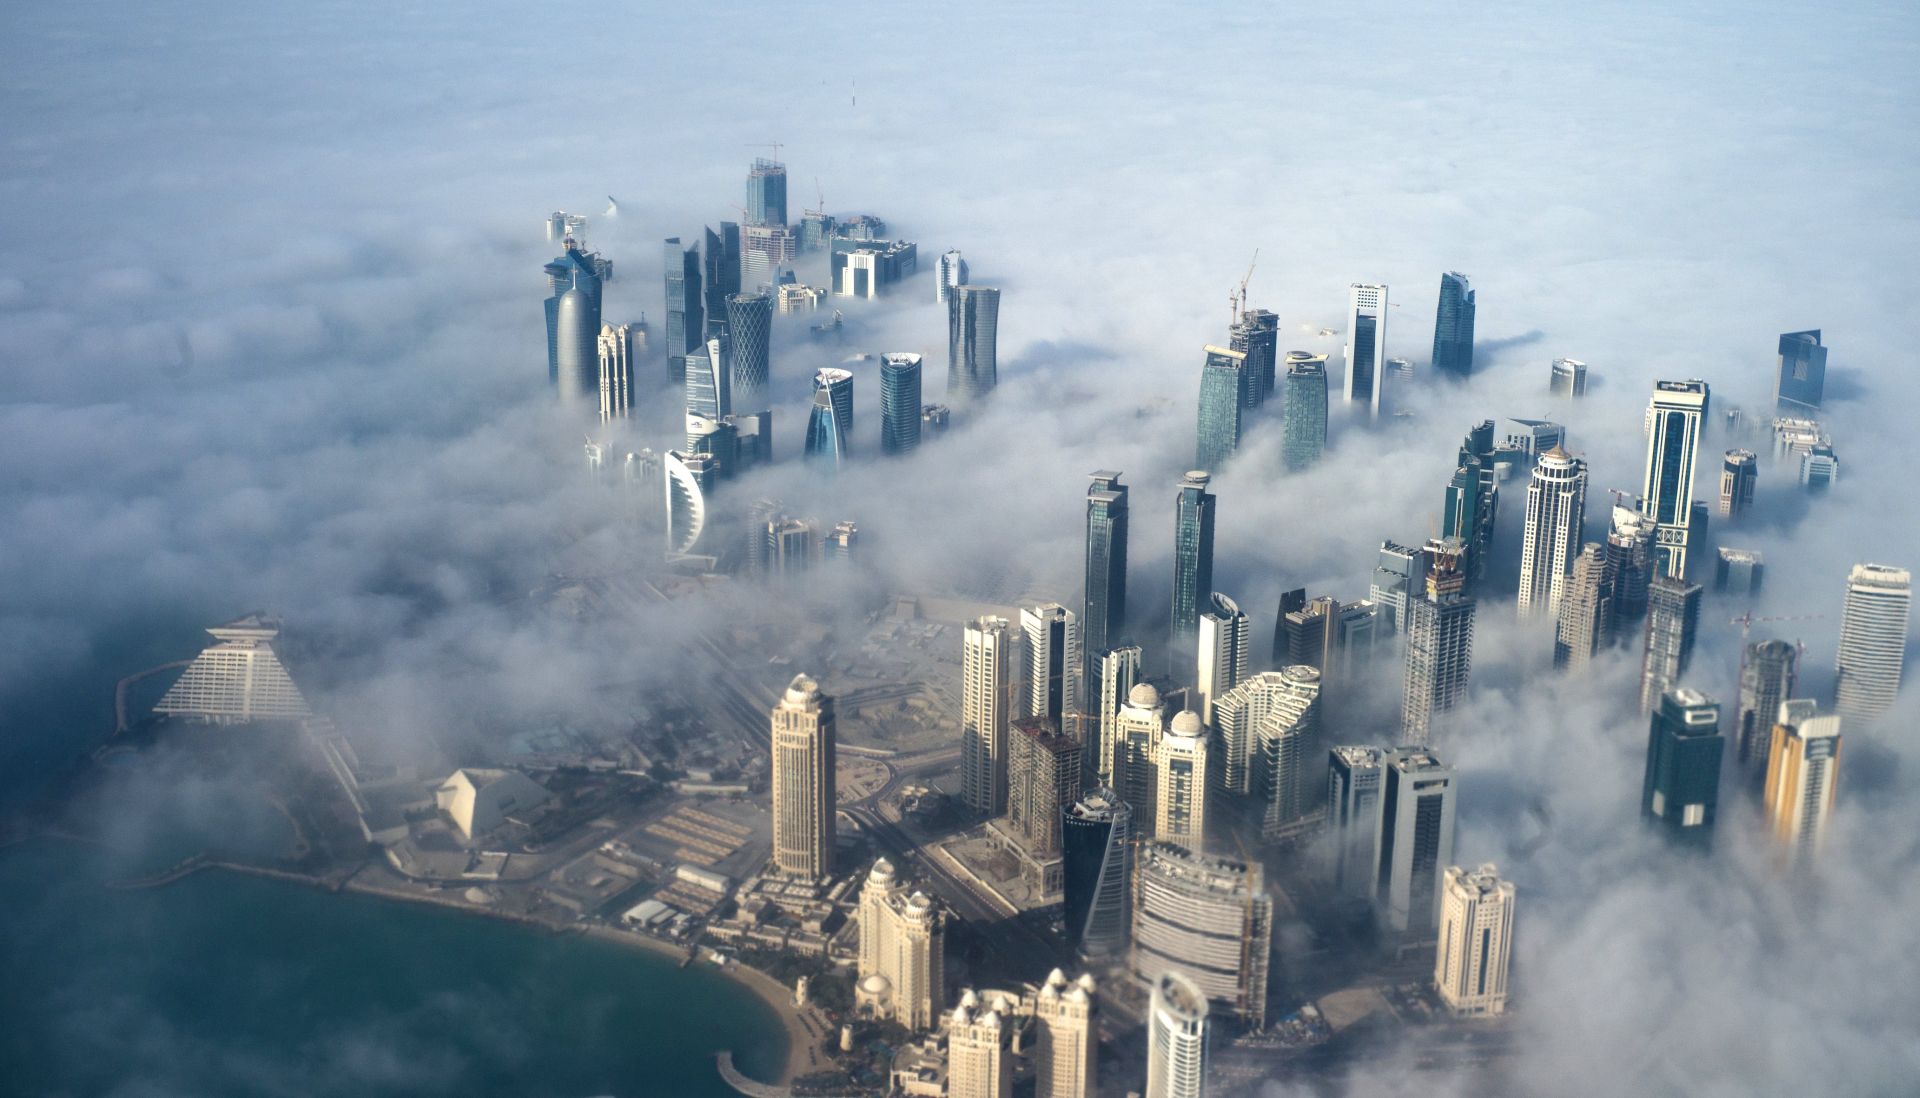 epa06011227 (FILE) - An aerial view of high-rise buildings emerging through fog covering the skyline of Doha, as the sun rises over the city, in Doha, Qatar, 15 February 2014 (reissued 05 June 2017). According to media reports, Egypt, Saudi Arabia, Bahrain and the United Arab Emirates cut off diplomatic ties with Qatar on 05 June 2017, accusing Qatar of supporting terrorism.  EPA/YOAN VALAT